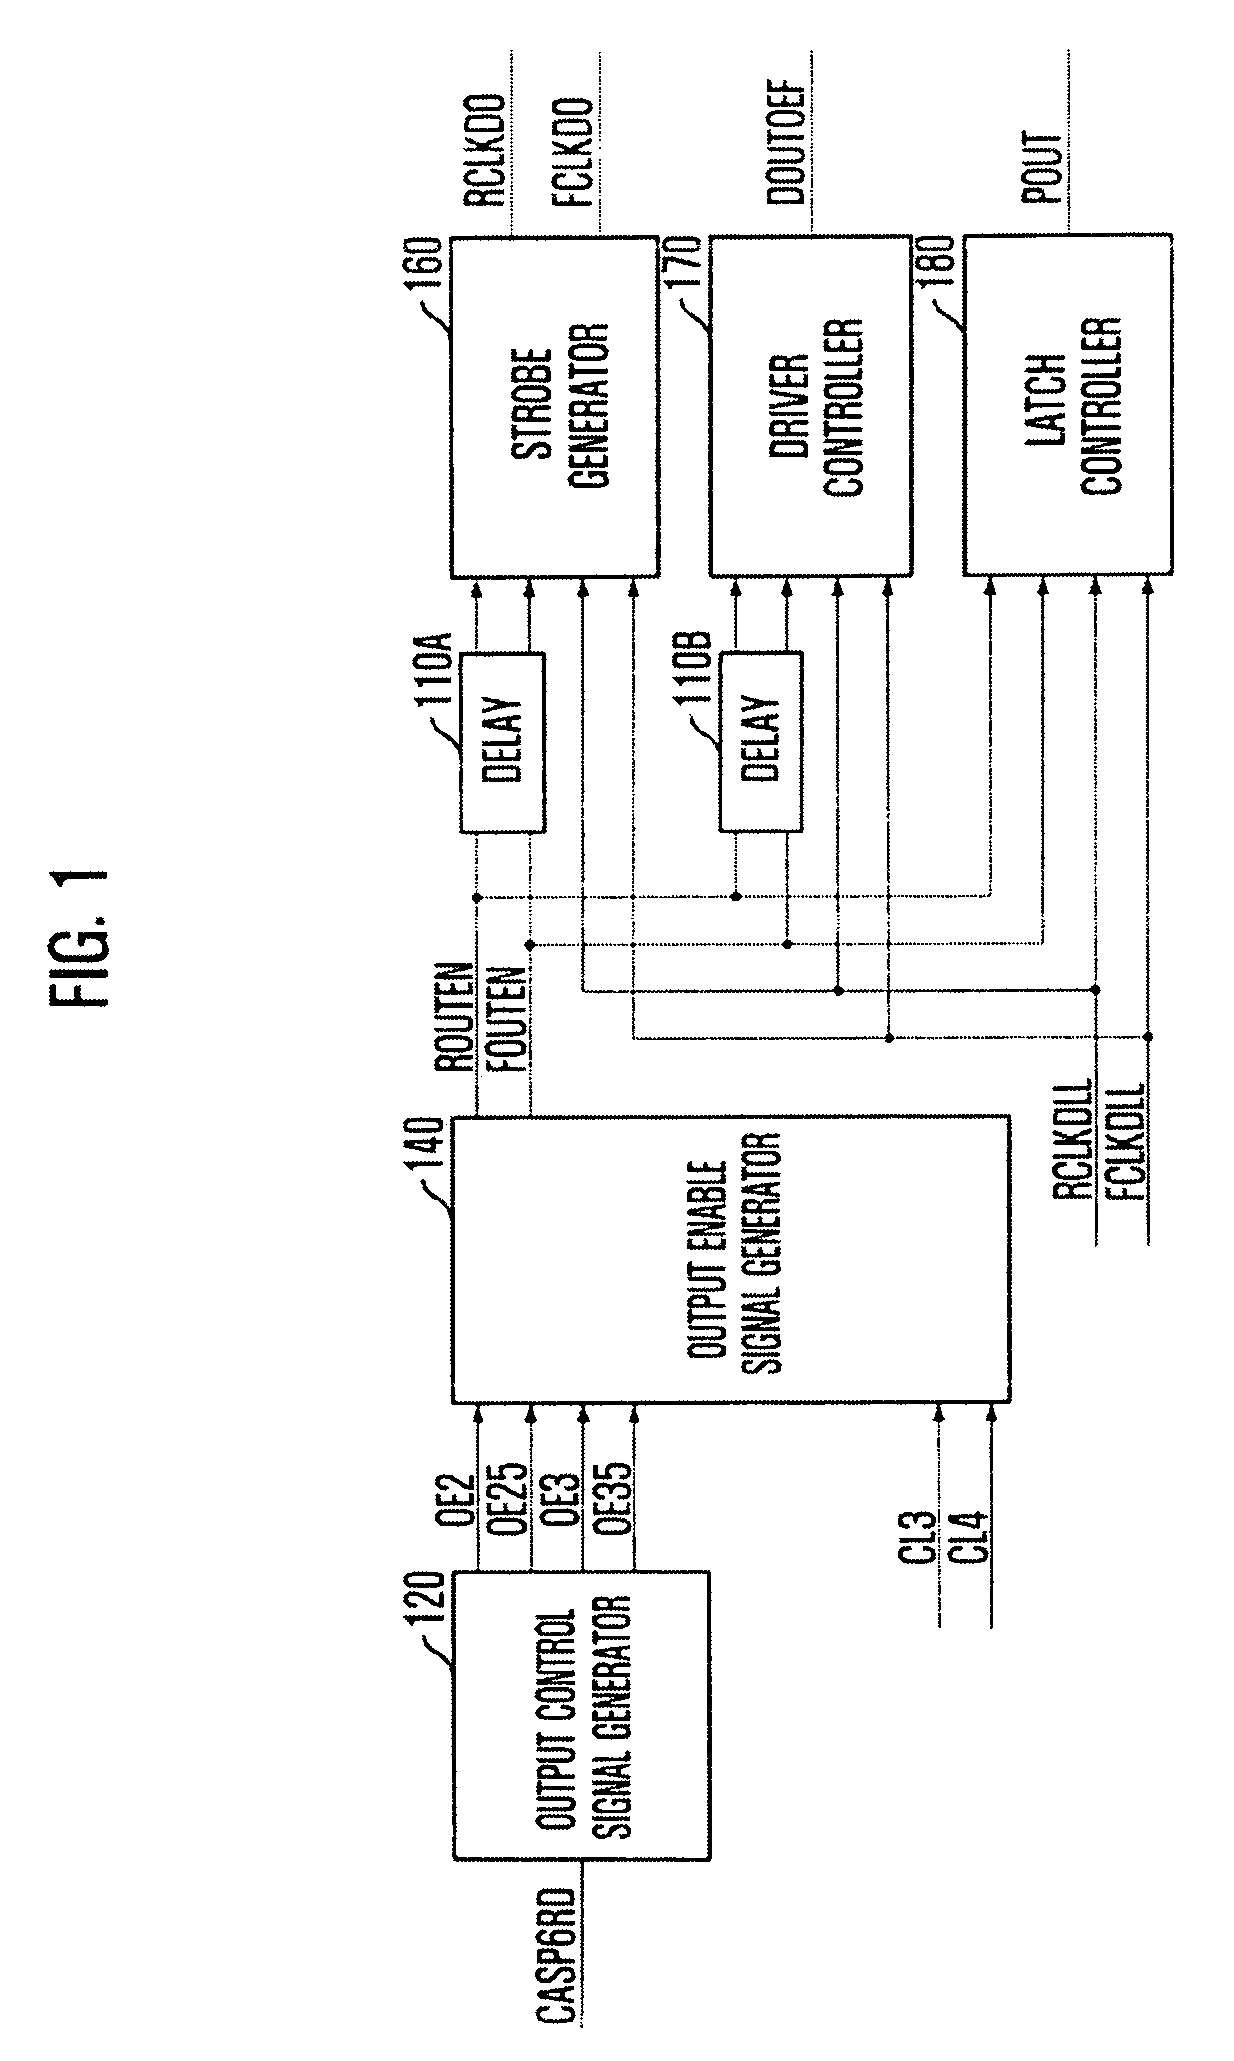 Semiconductor memory device and method of operating the same